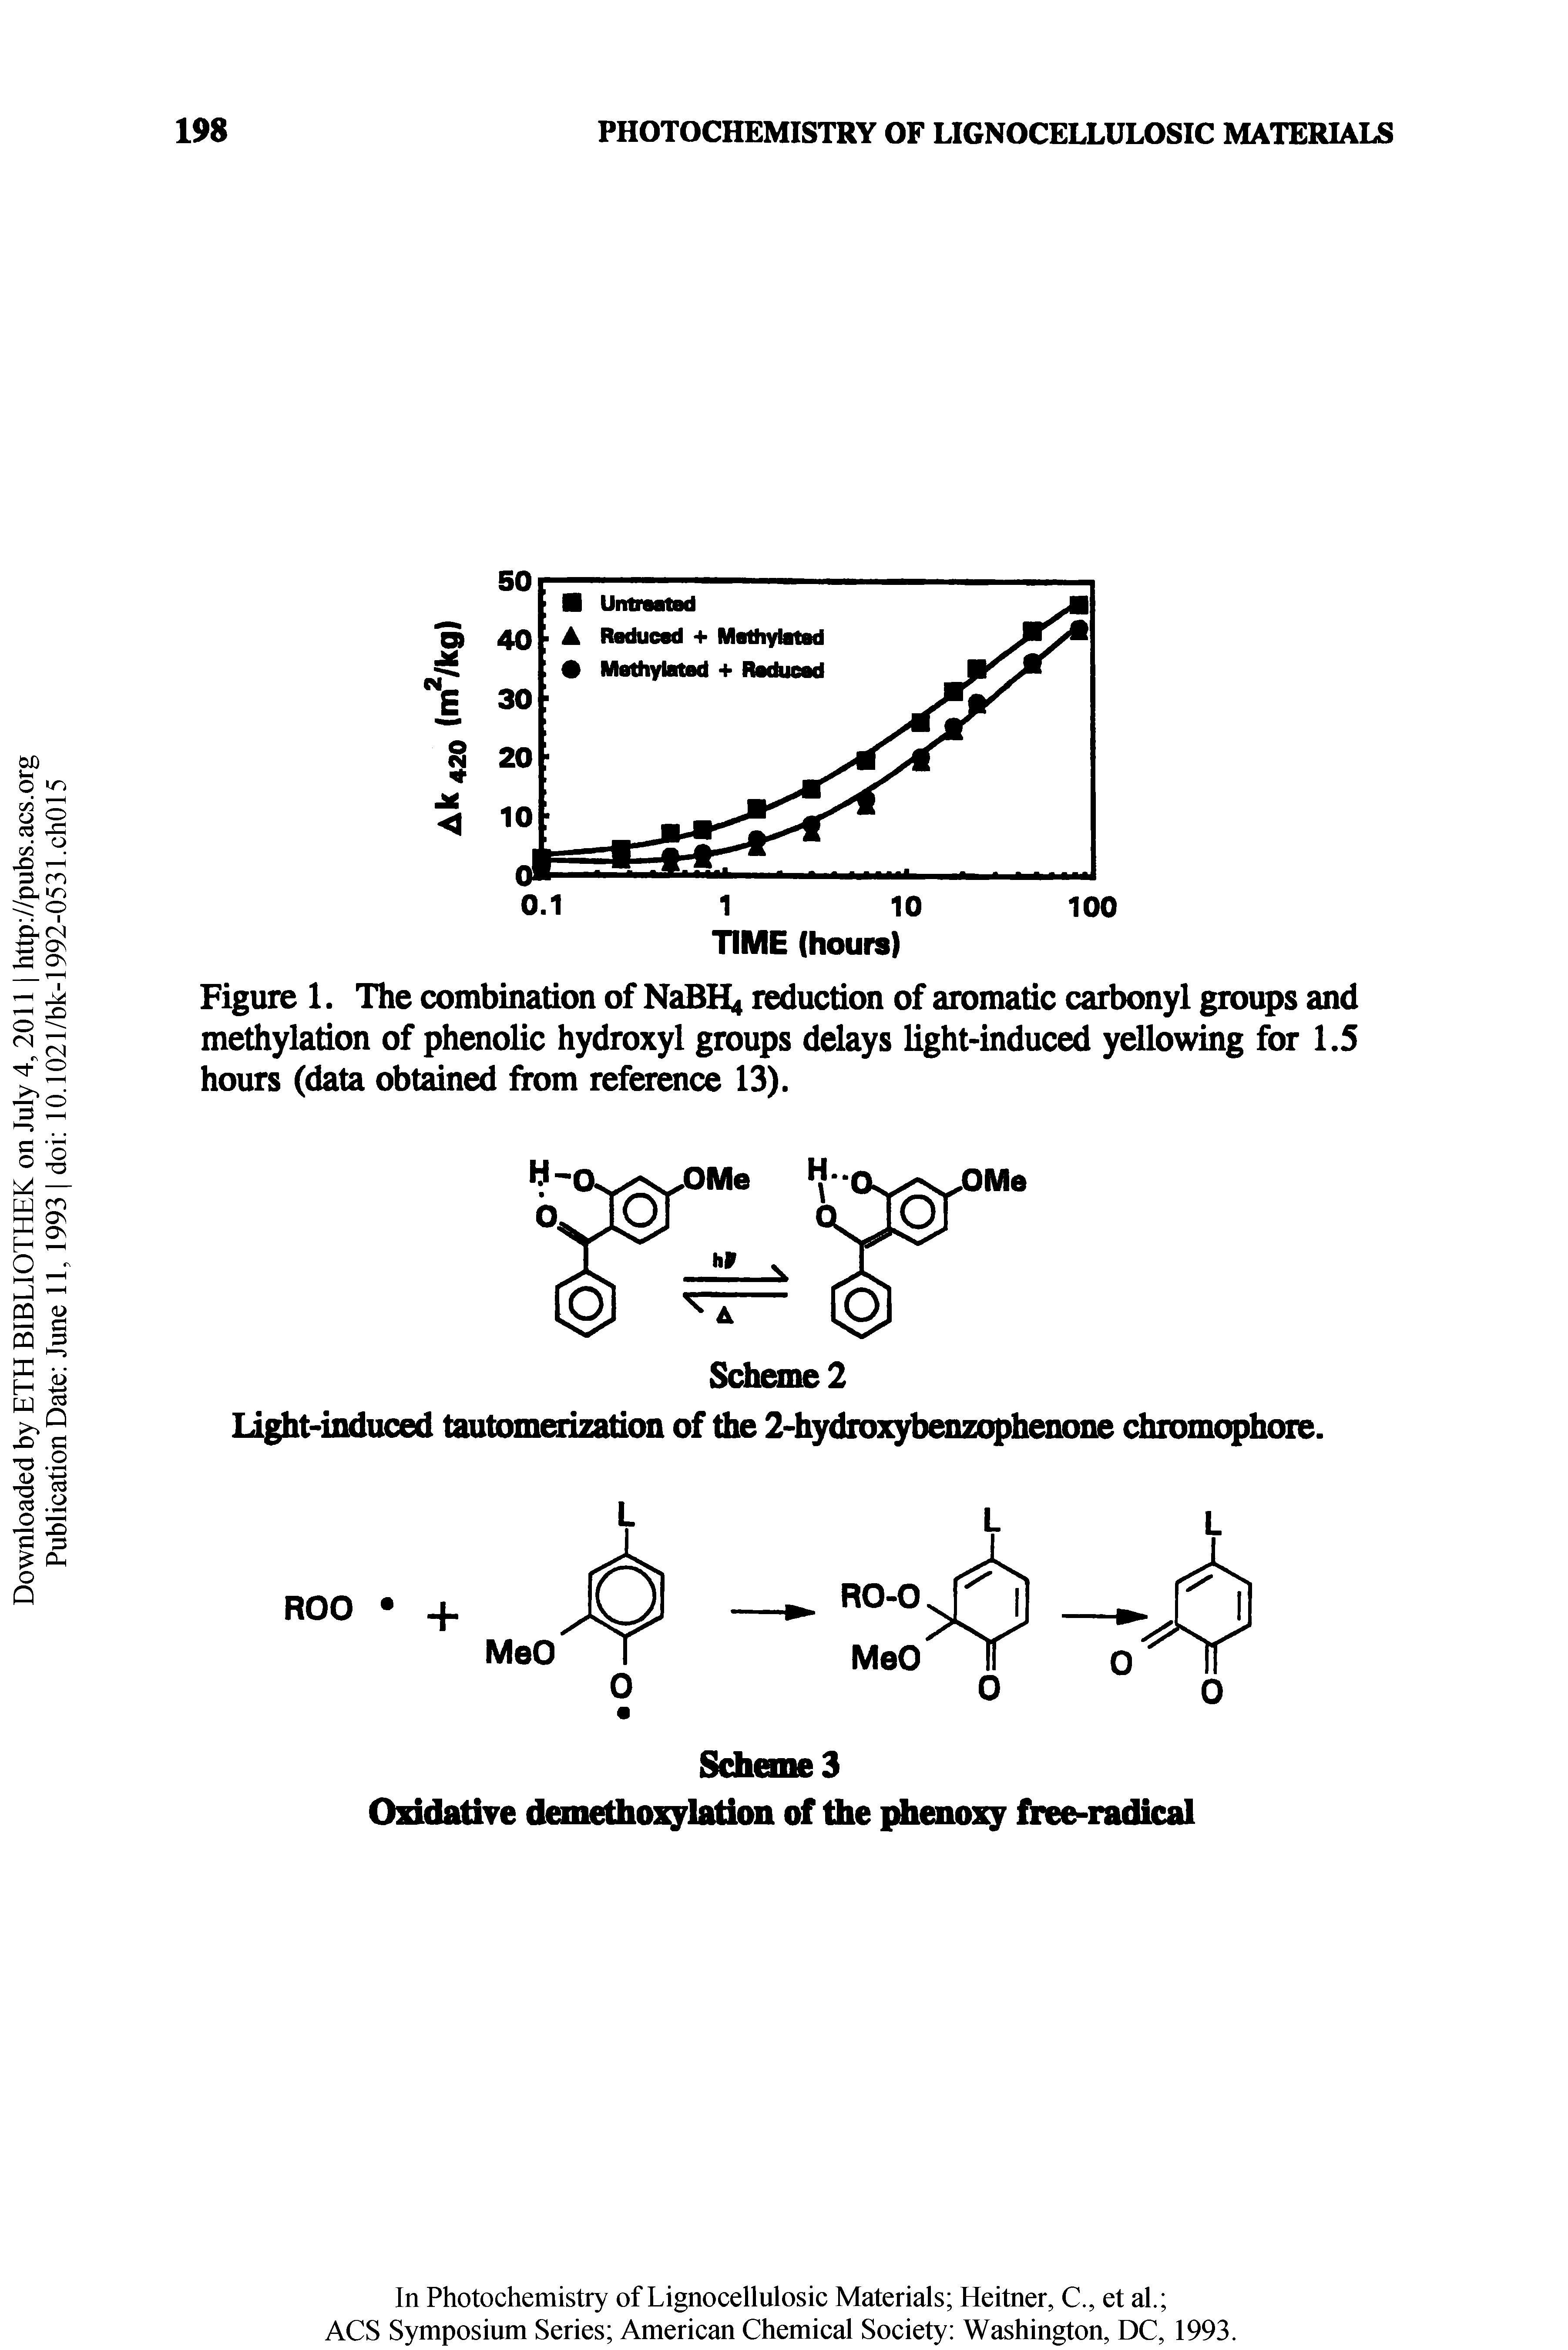 Figure 1. The combination of NaBH4 reduction of aromatic carbonyl groups and methylation of phenolic hydroxyl groups delays light-induced yellowing for 1.5 hours (data obtained from reference 13).